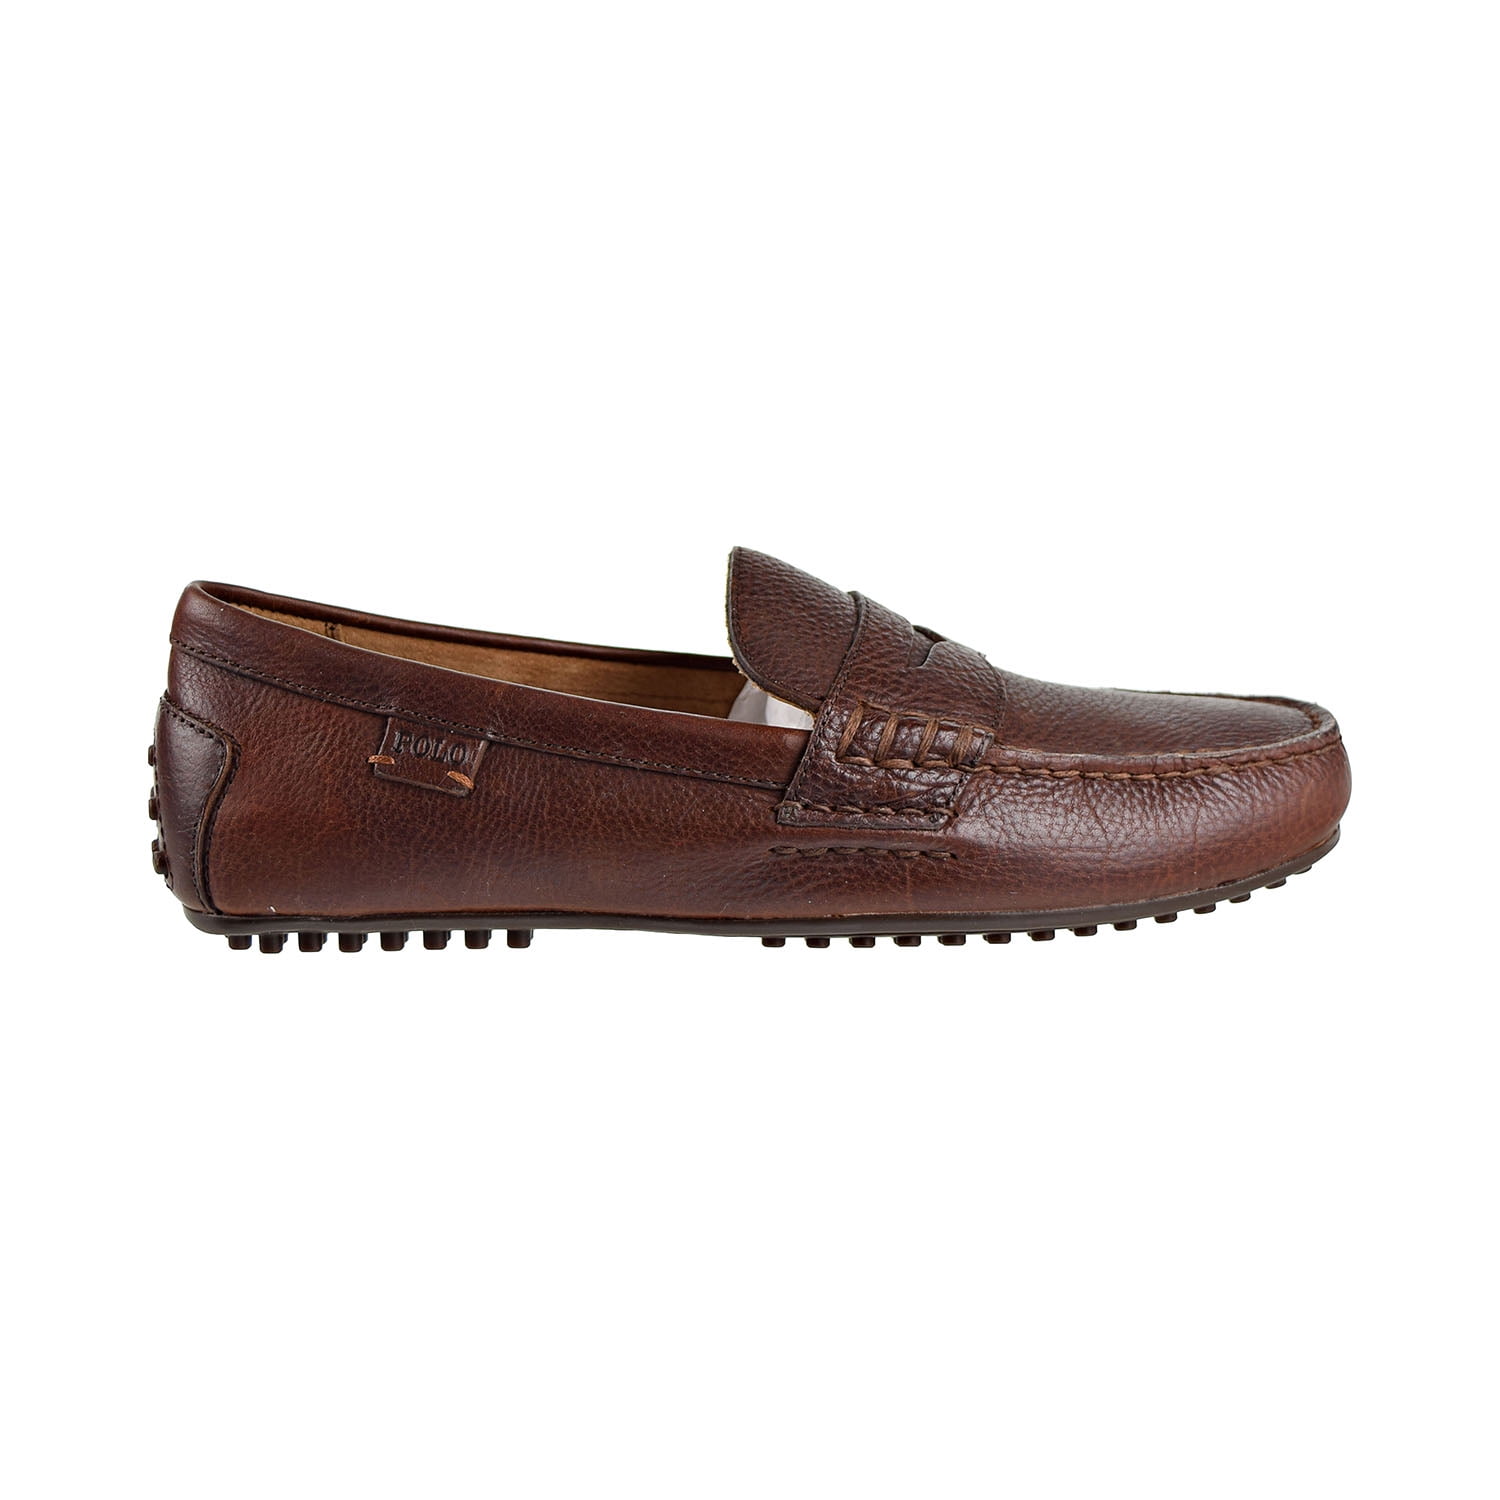 Polo Ralph Lauren Wes Slip-On Driver Men's Loafers Tan 803713491-002 ...